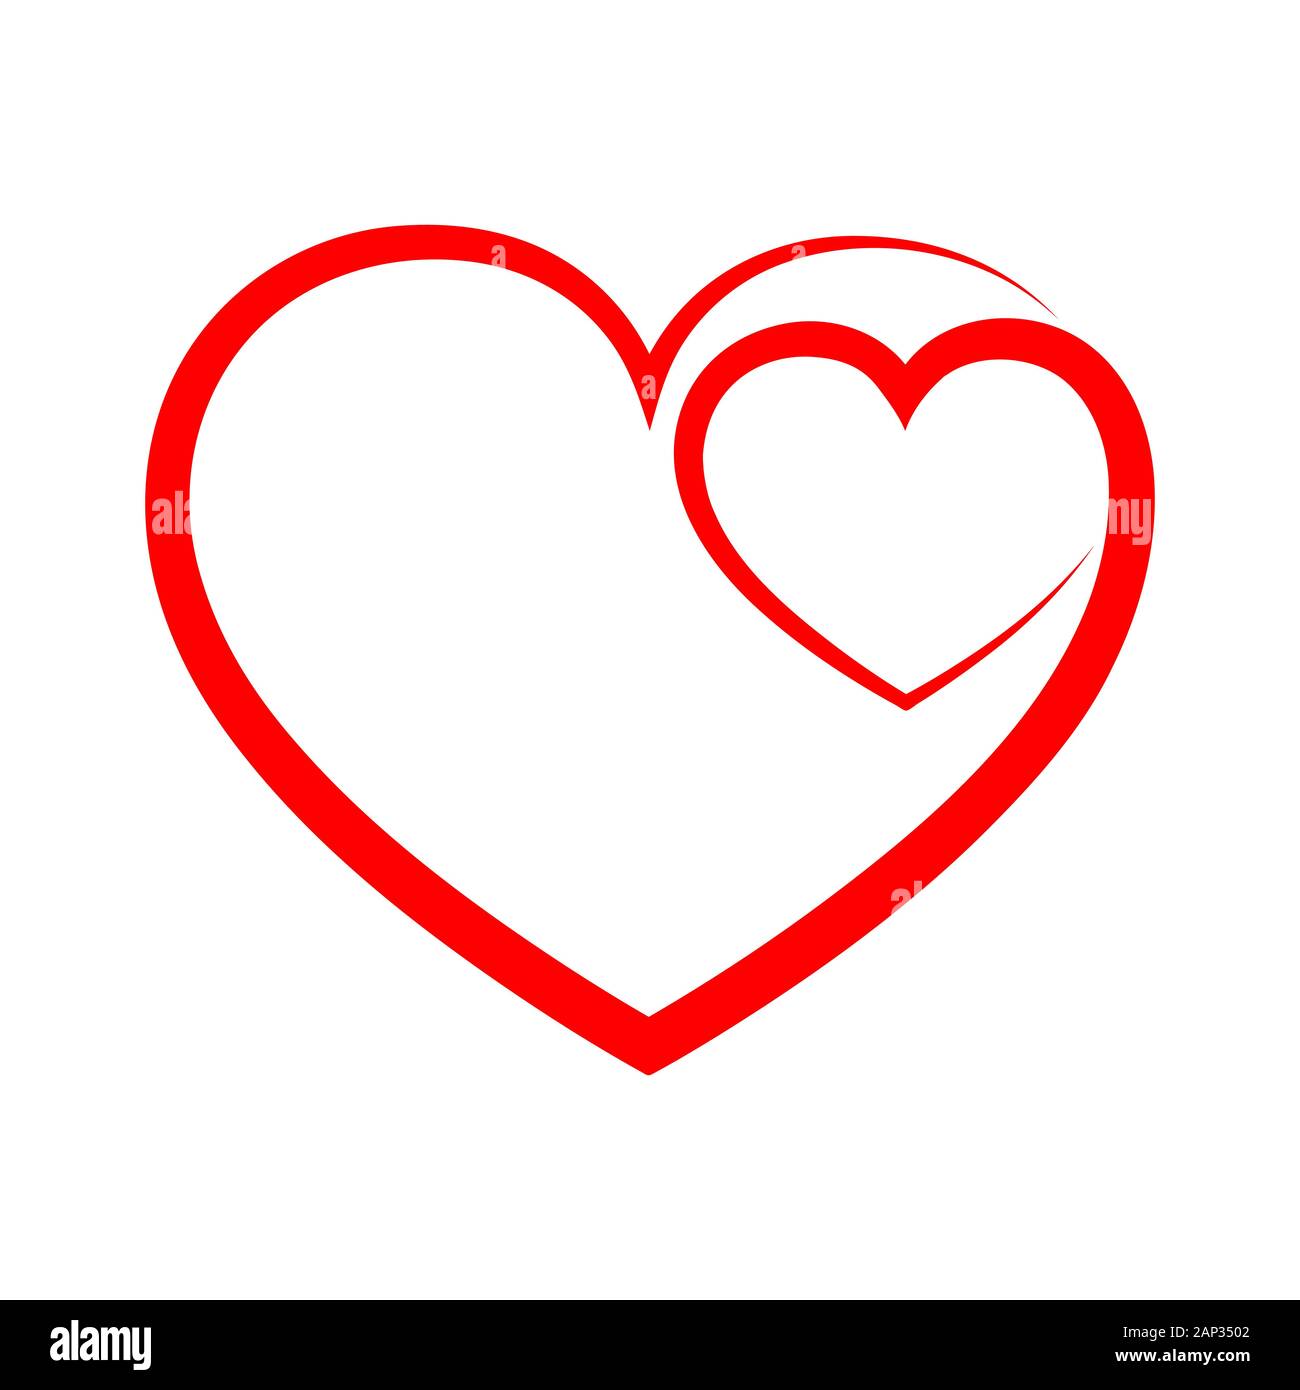 Abstract heart shape outline. Vector illustration. Red heart icon in flat style. The heart as a symbol of love. Stock Vector